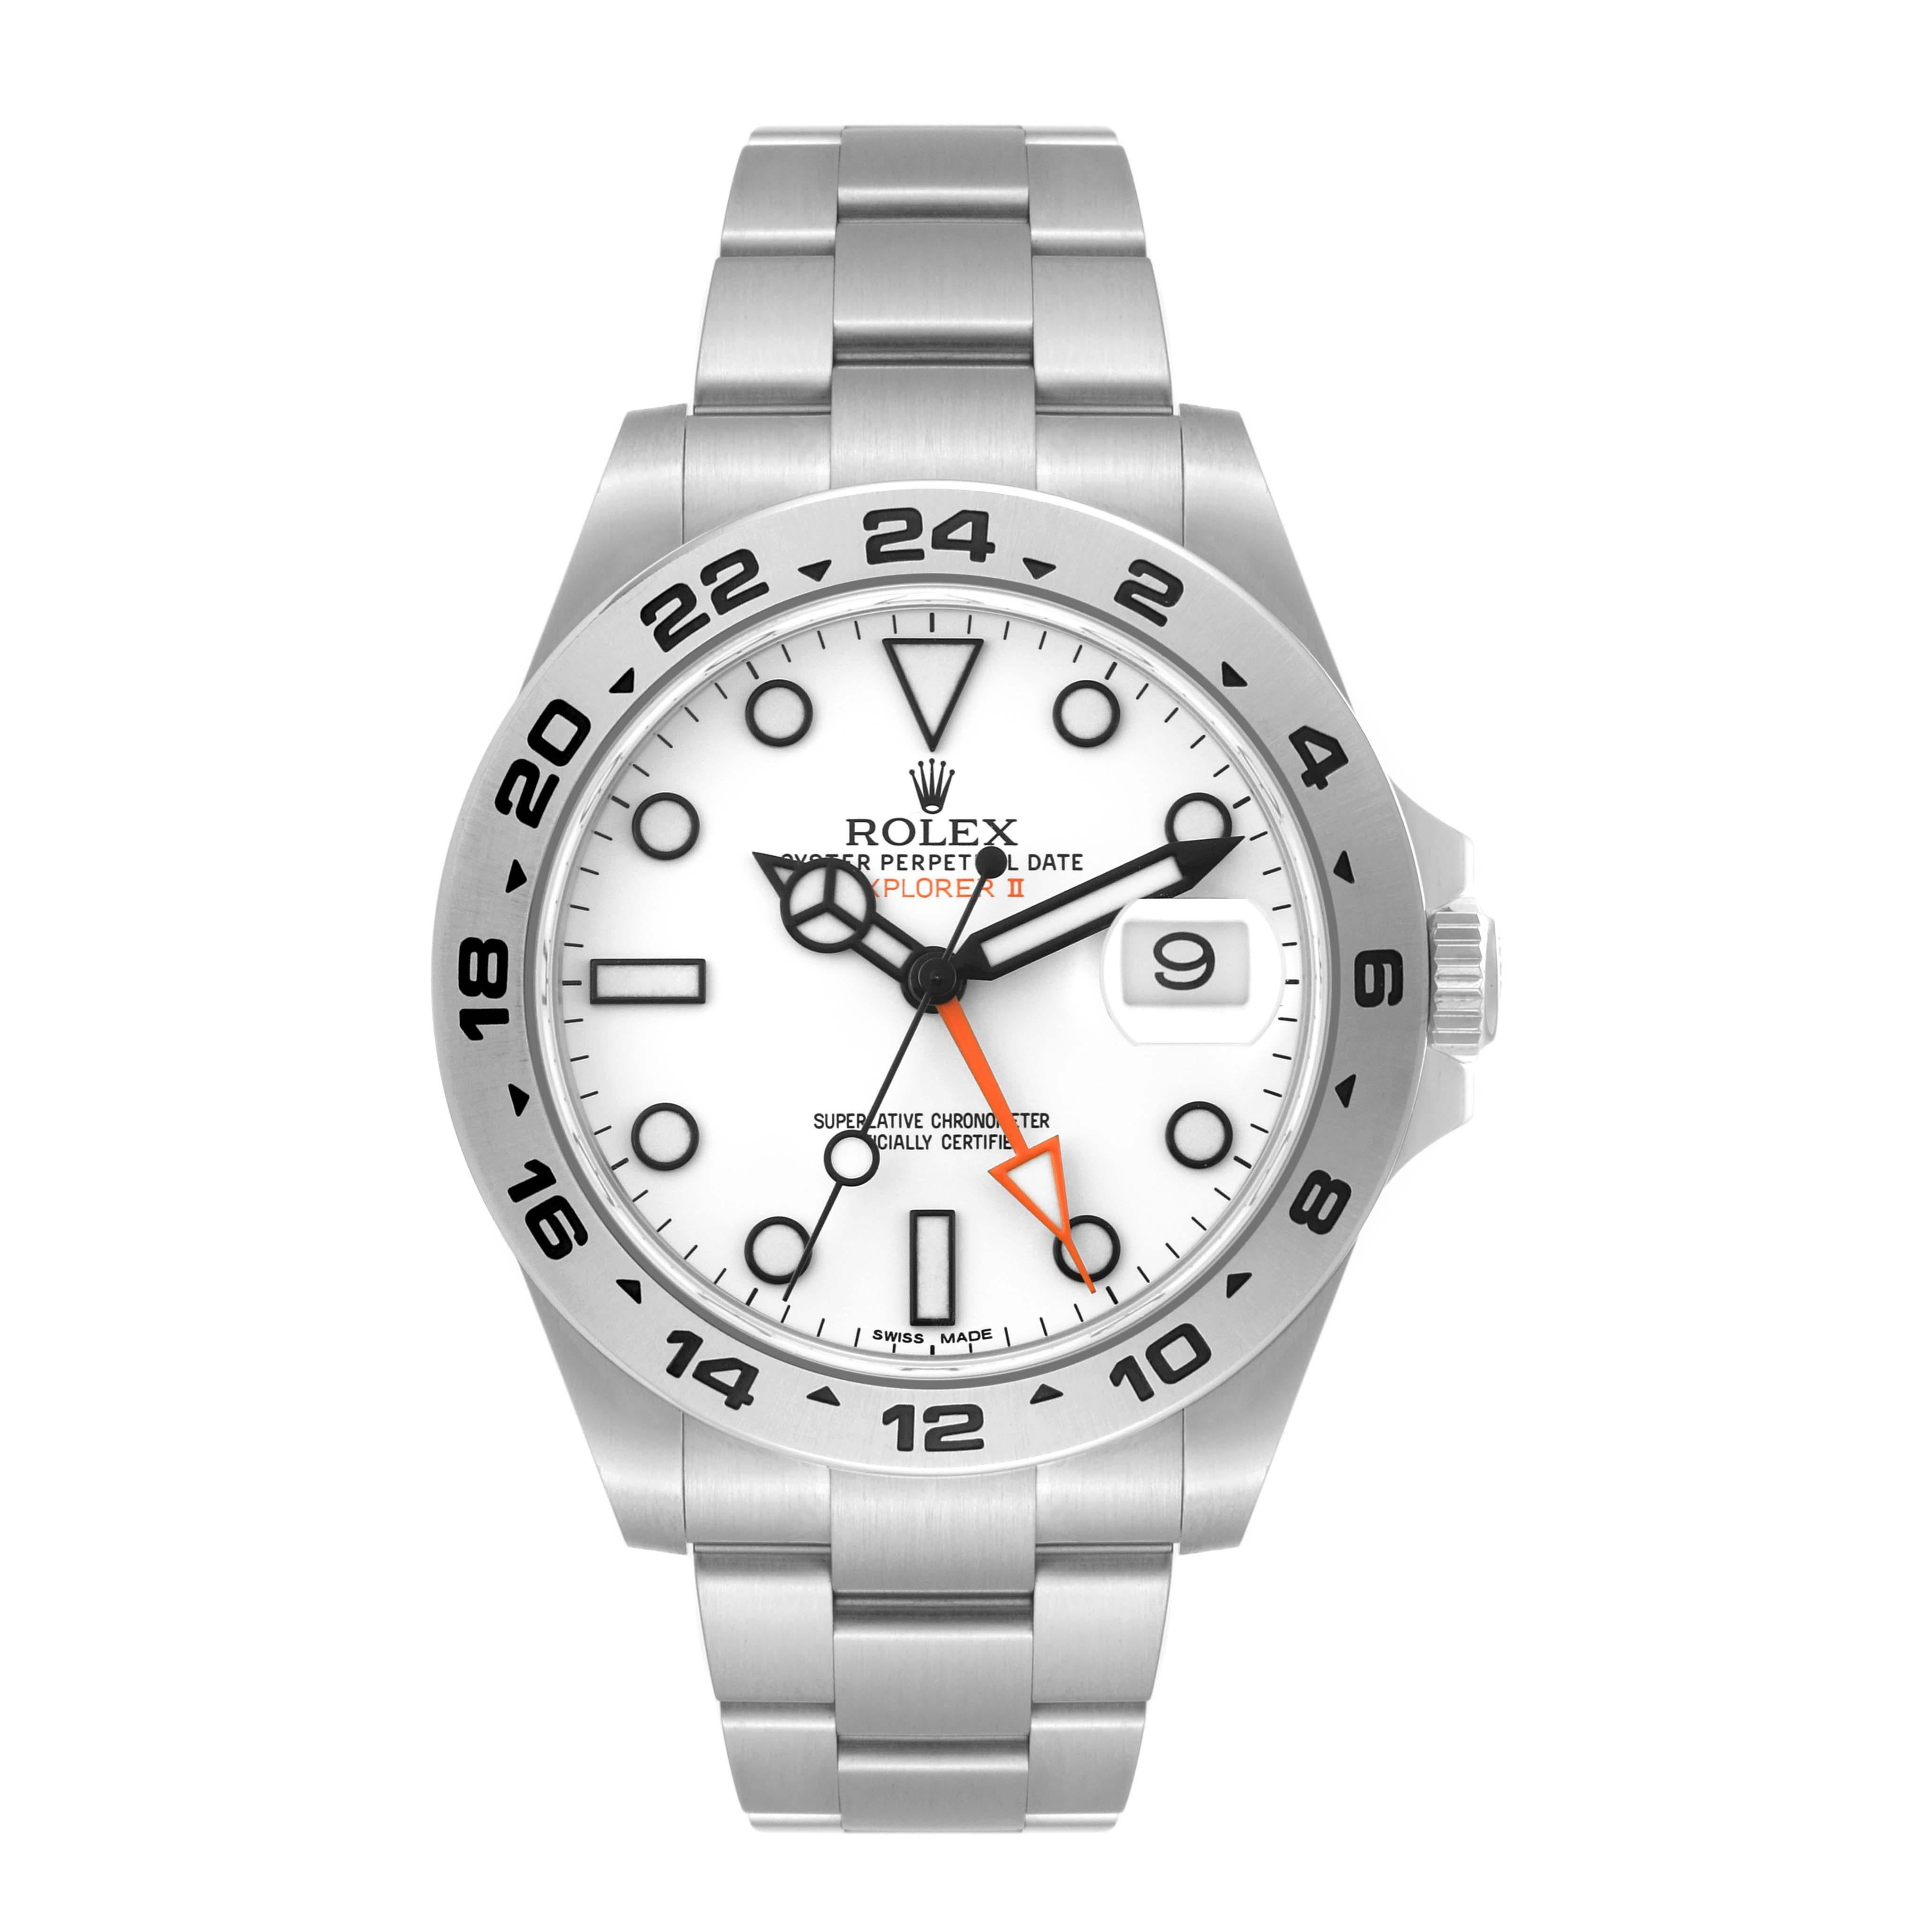 Rolex Explorer II White Dial Orange Hand Steel Mens Watch 216570 Box Card. Officially certified chronometer automatic self-winding movement. Stainless steel case 42.0 mm in diameter. Rolex logo on a crown. Stainless steel tachymetric scale bezel.